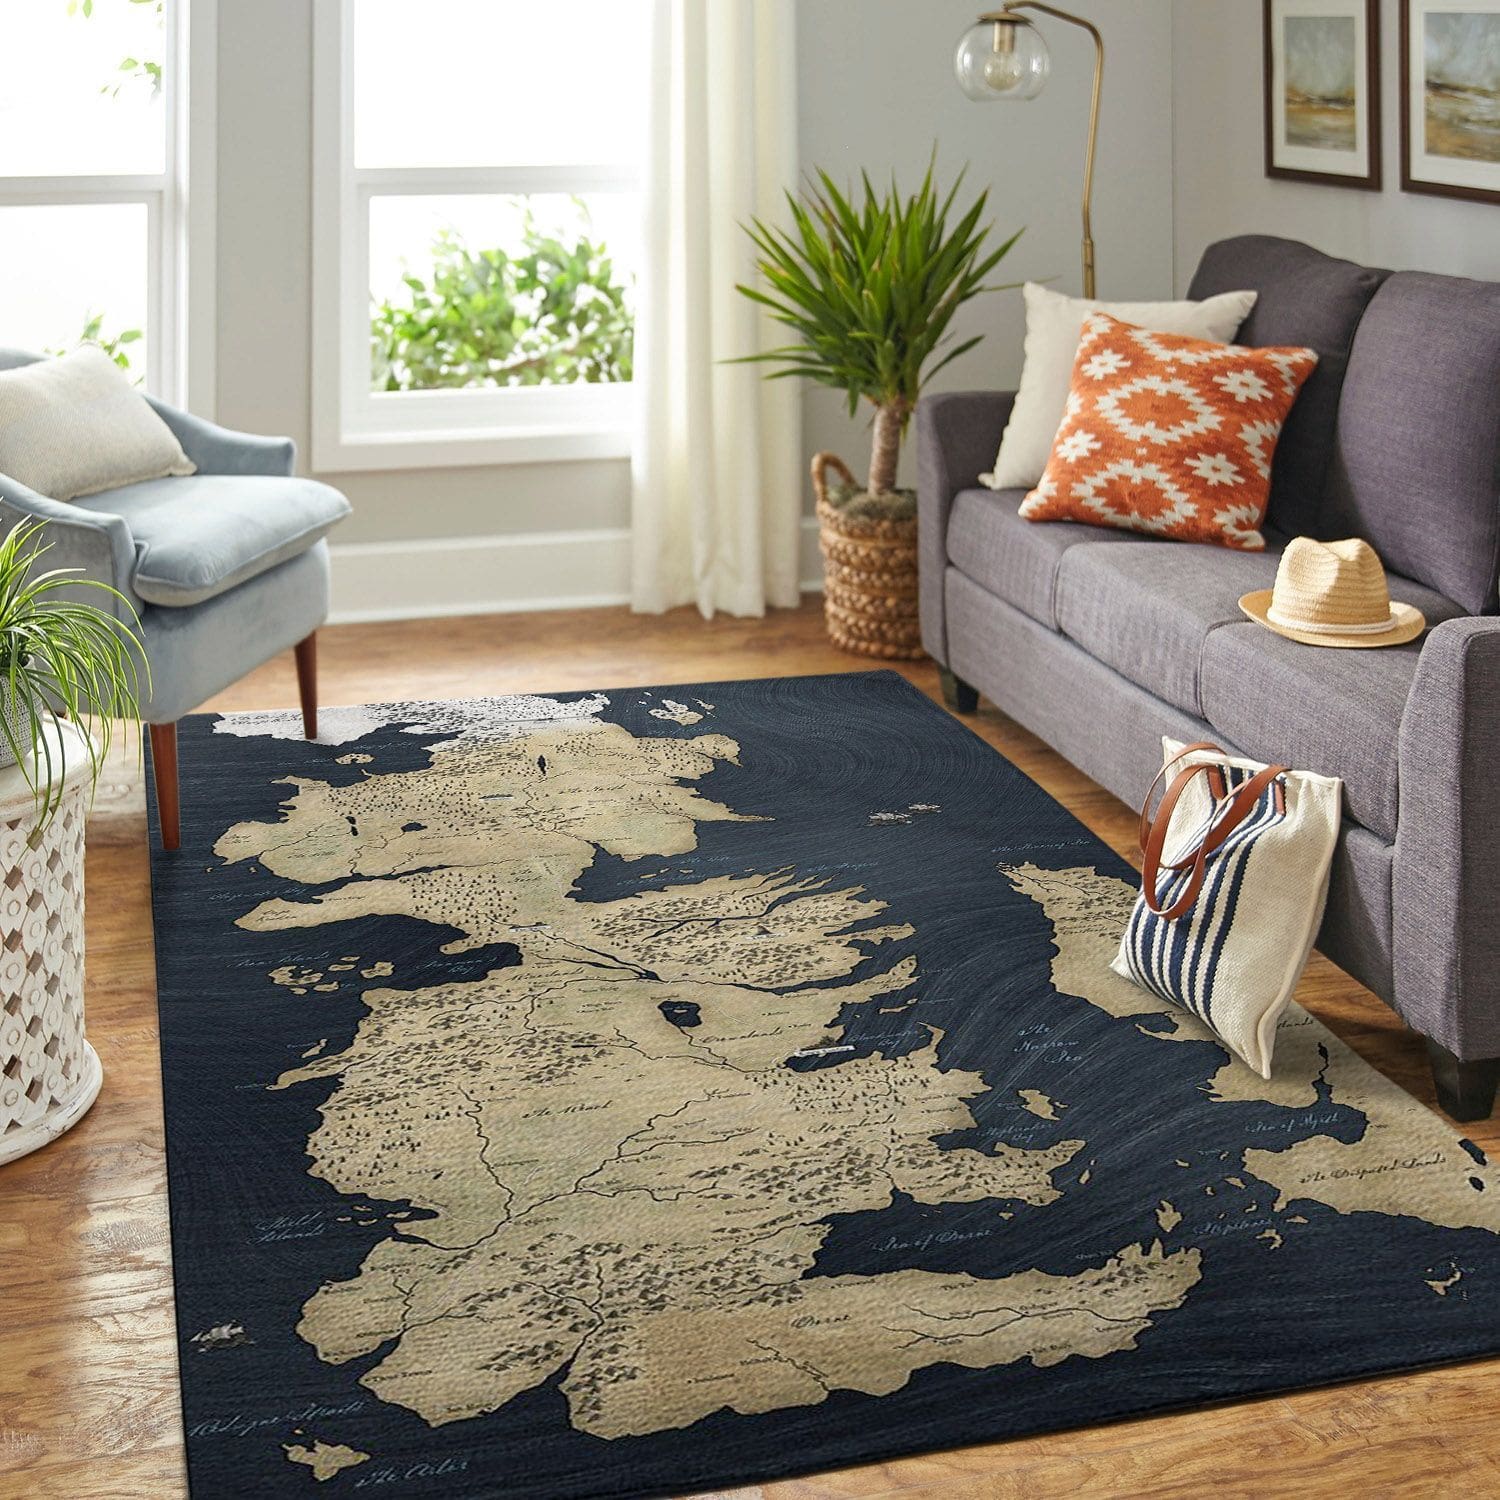 Amazon Game Of Thrones Living Room Area No6093 Rug